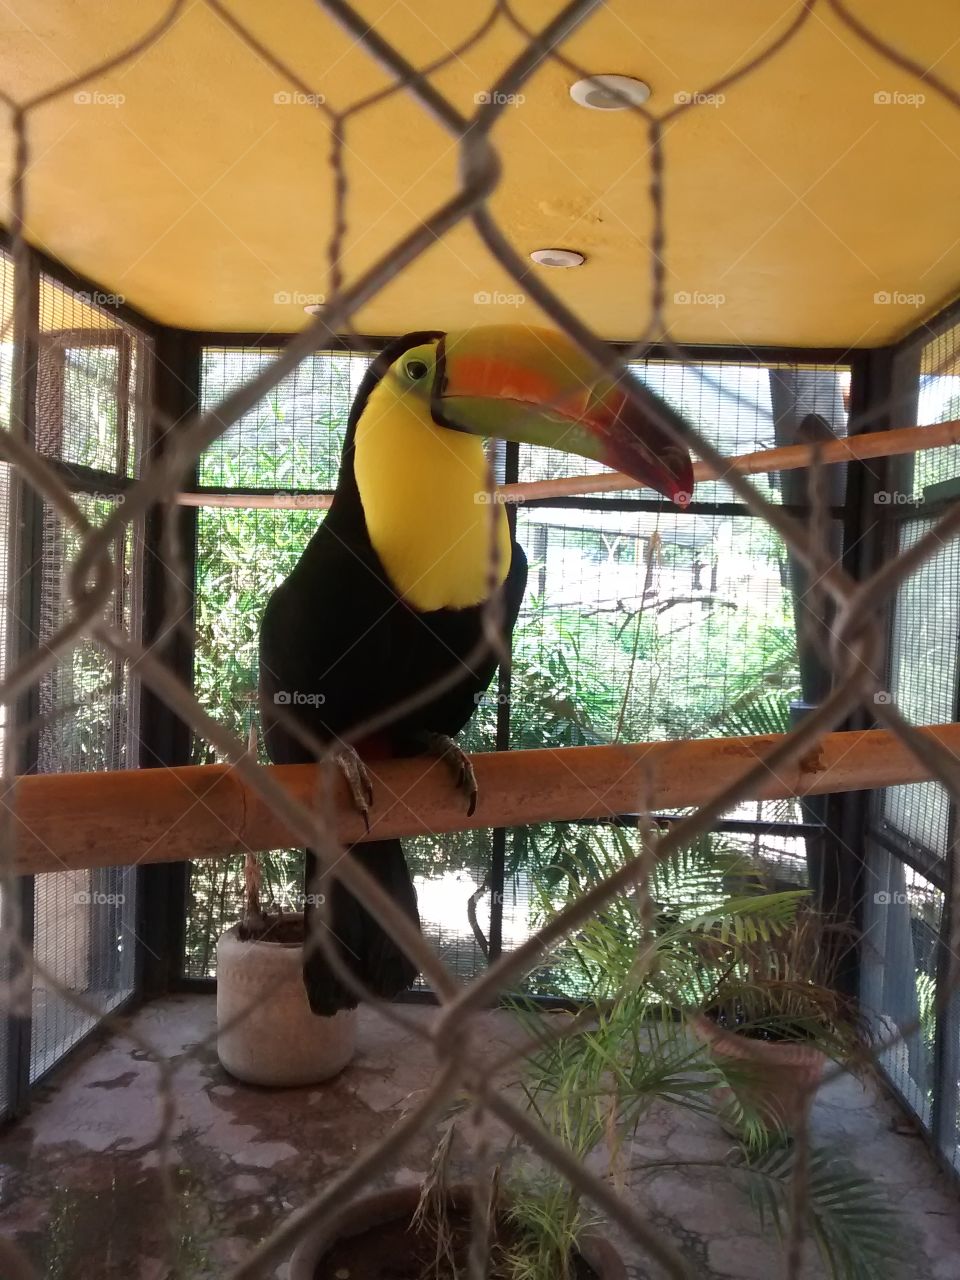 a tropical friend. This pal is a new bird of the local zoo of my town